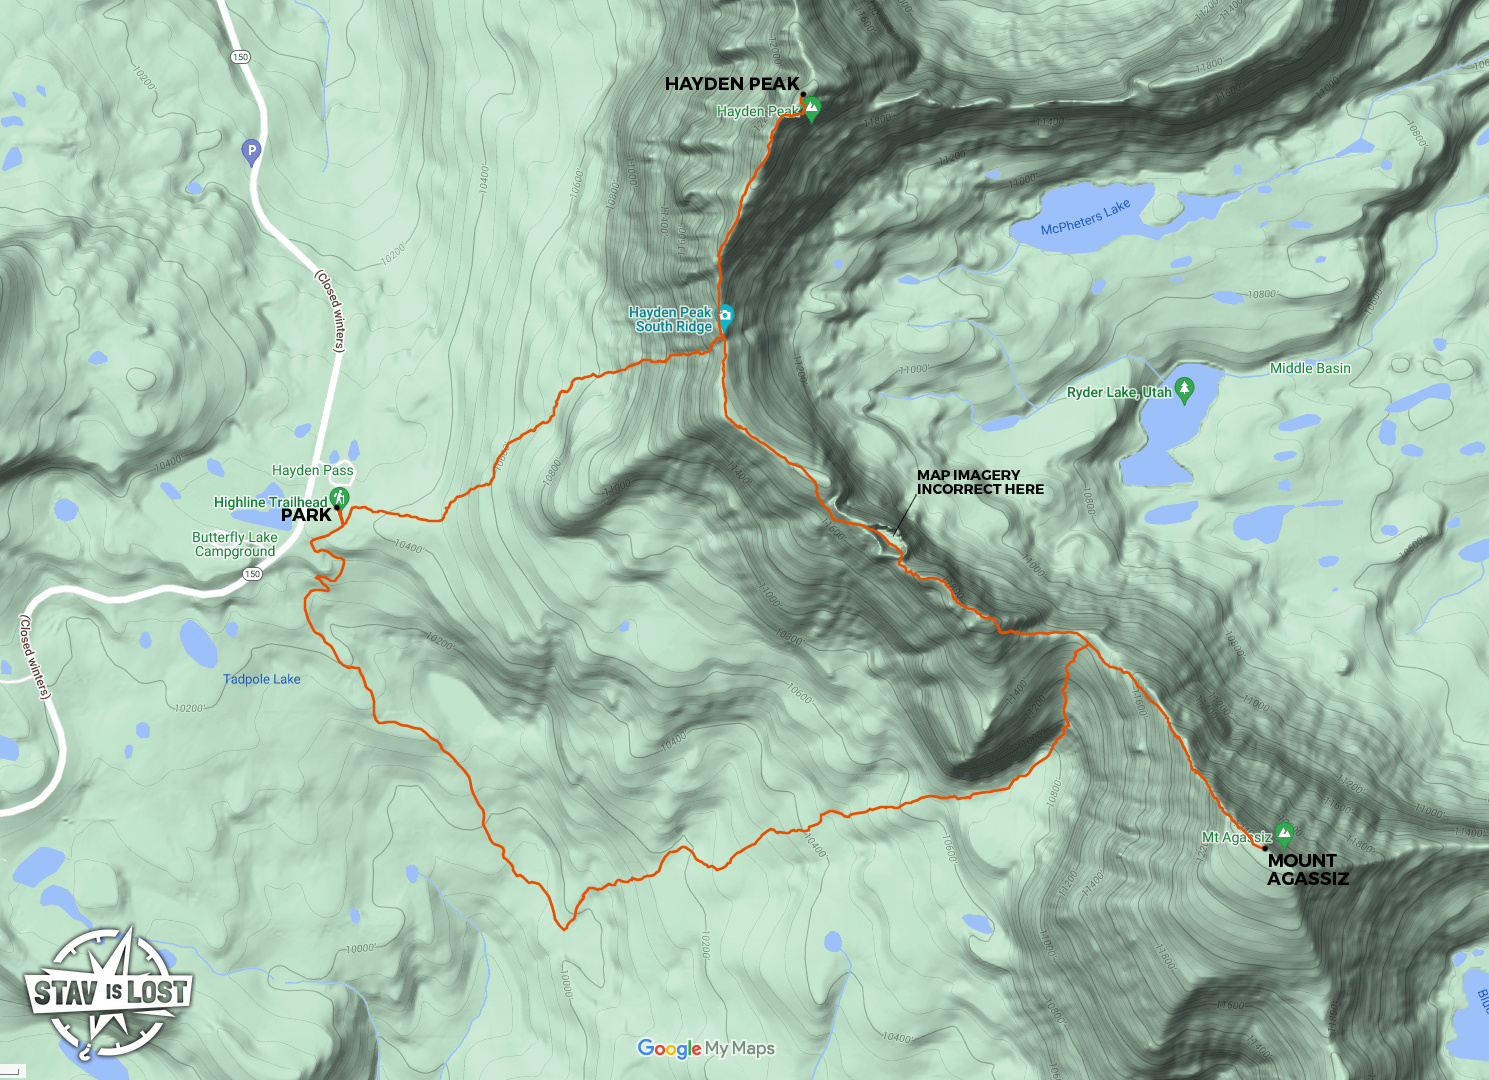 map for Hayden Peak and Mount Agassiz by stav is lost